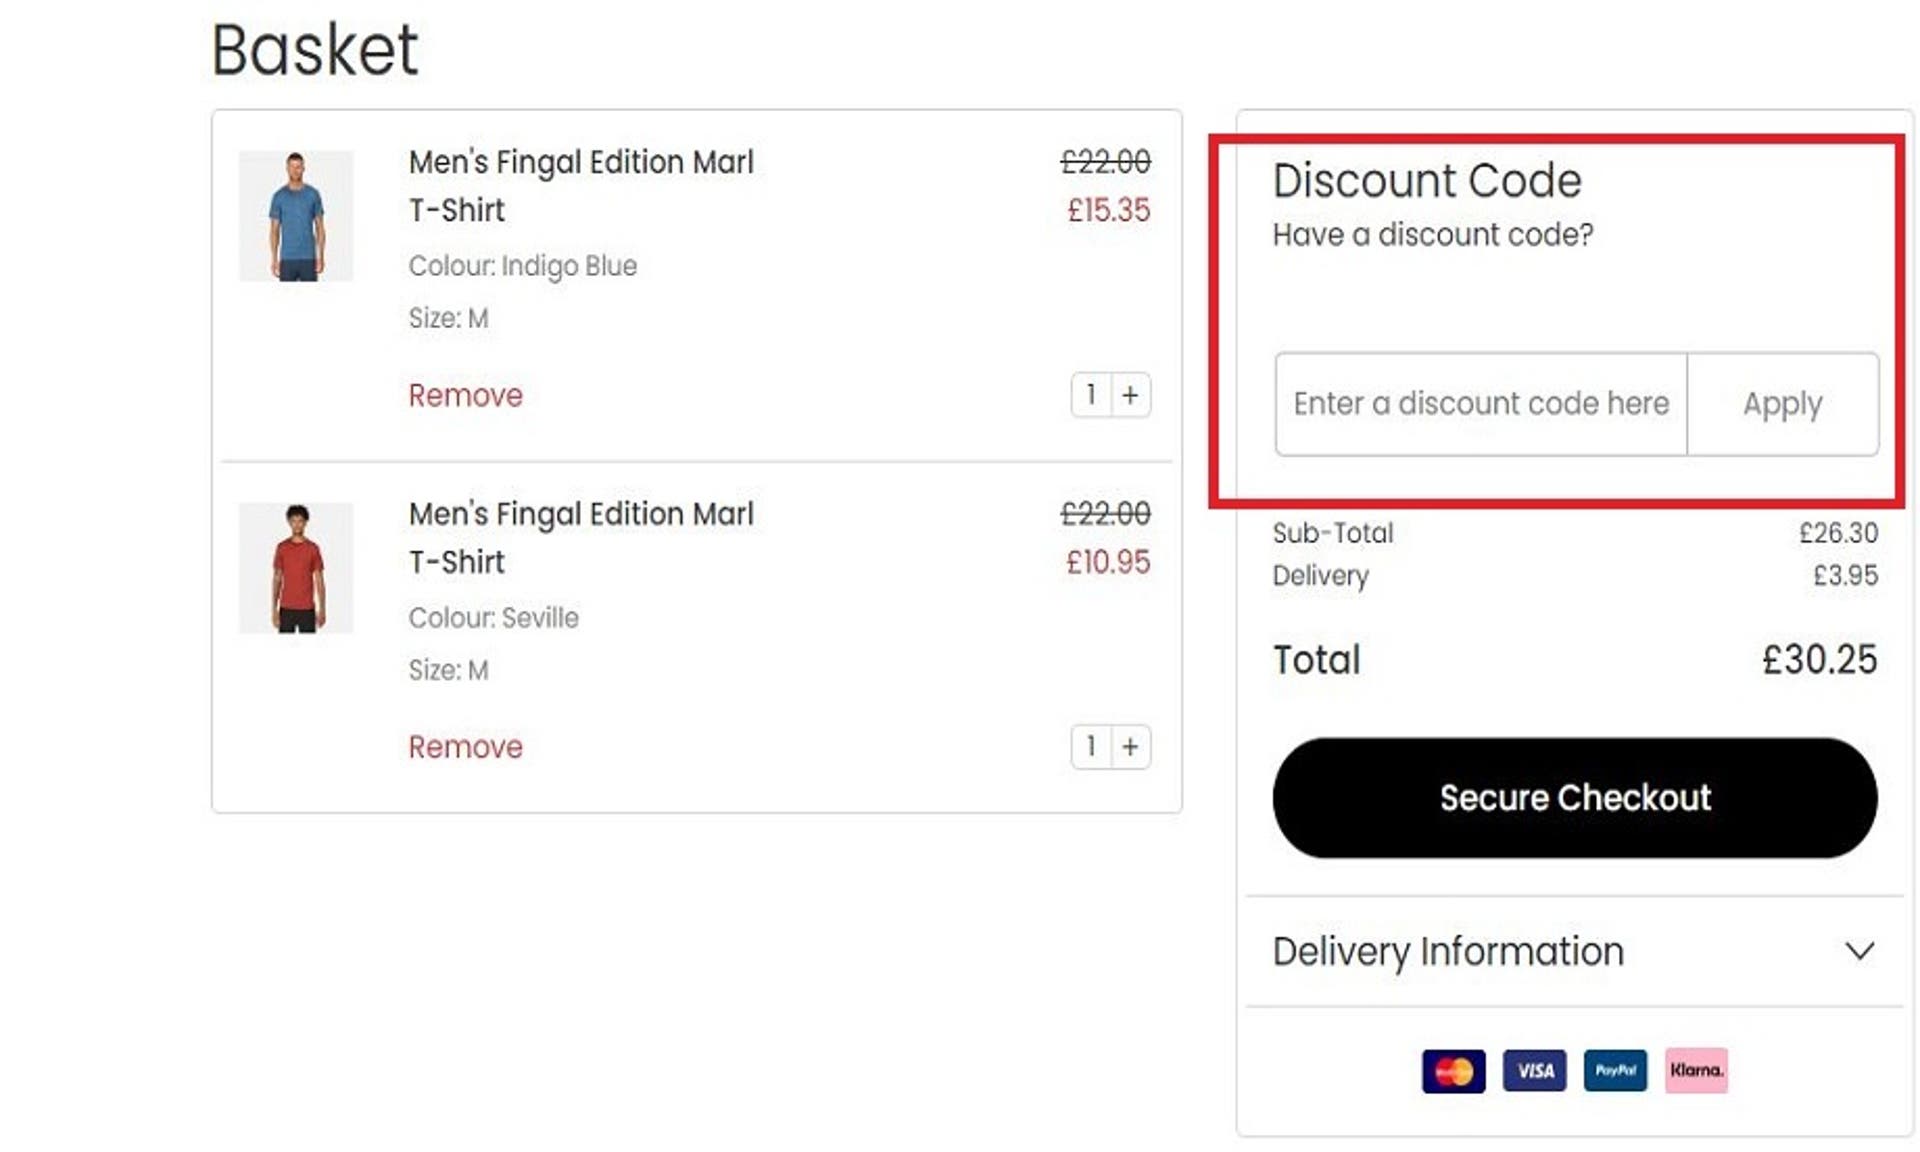  A screenshot of the Regatta website showing users how to use their discount code with the 'Discount Code' box and 'Apply' button highlighted. 